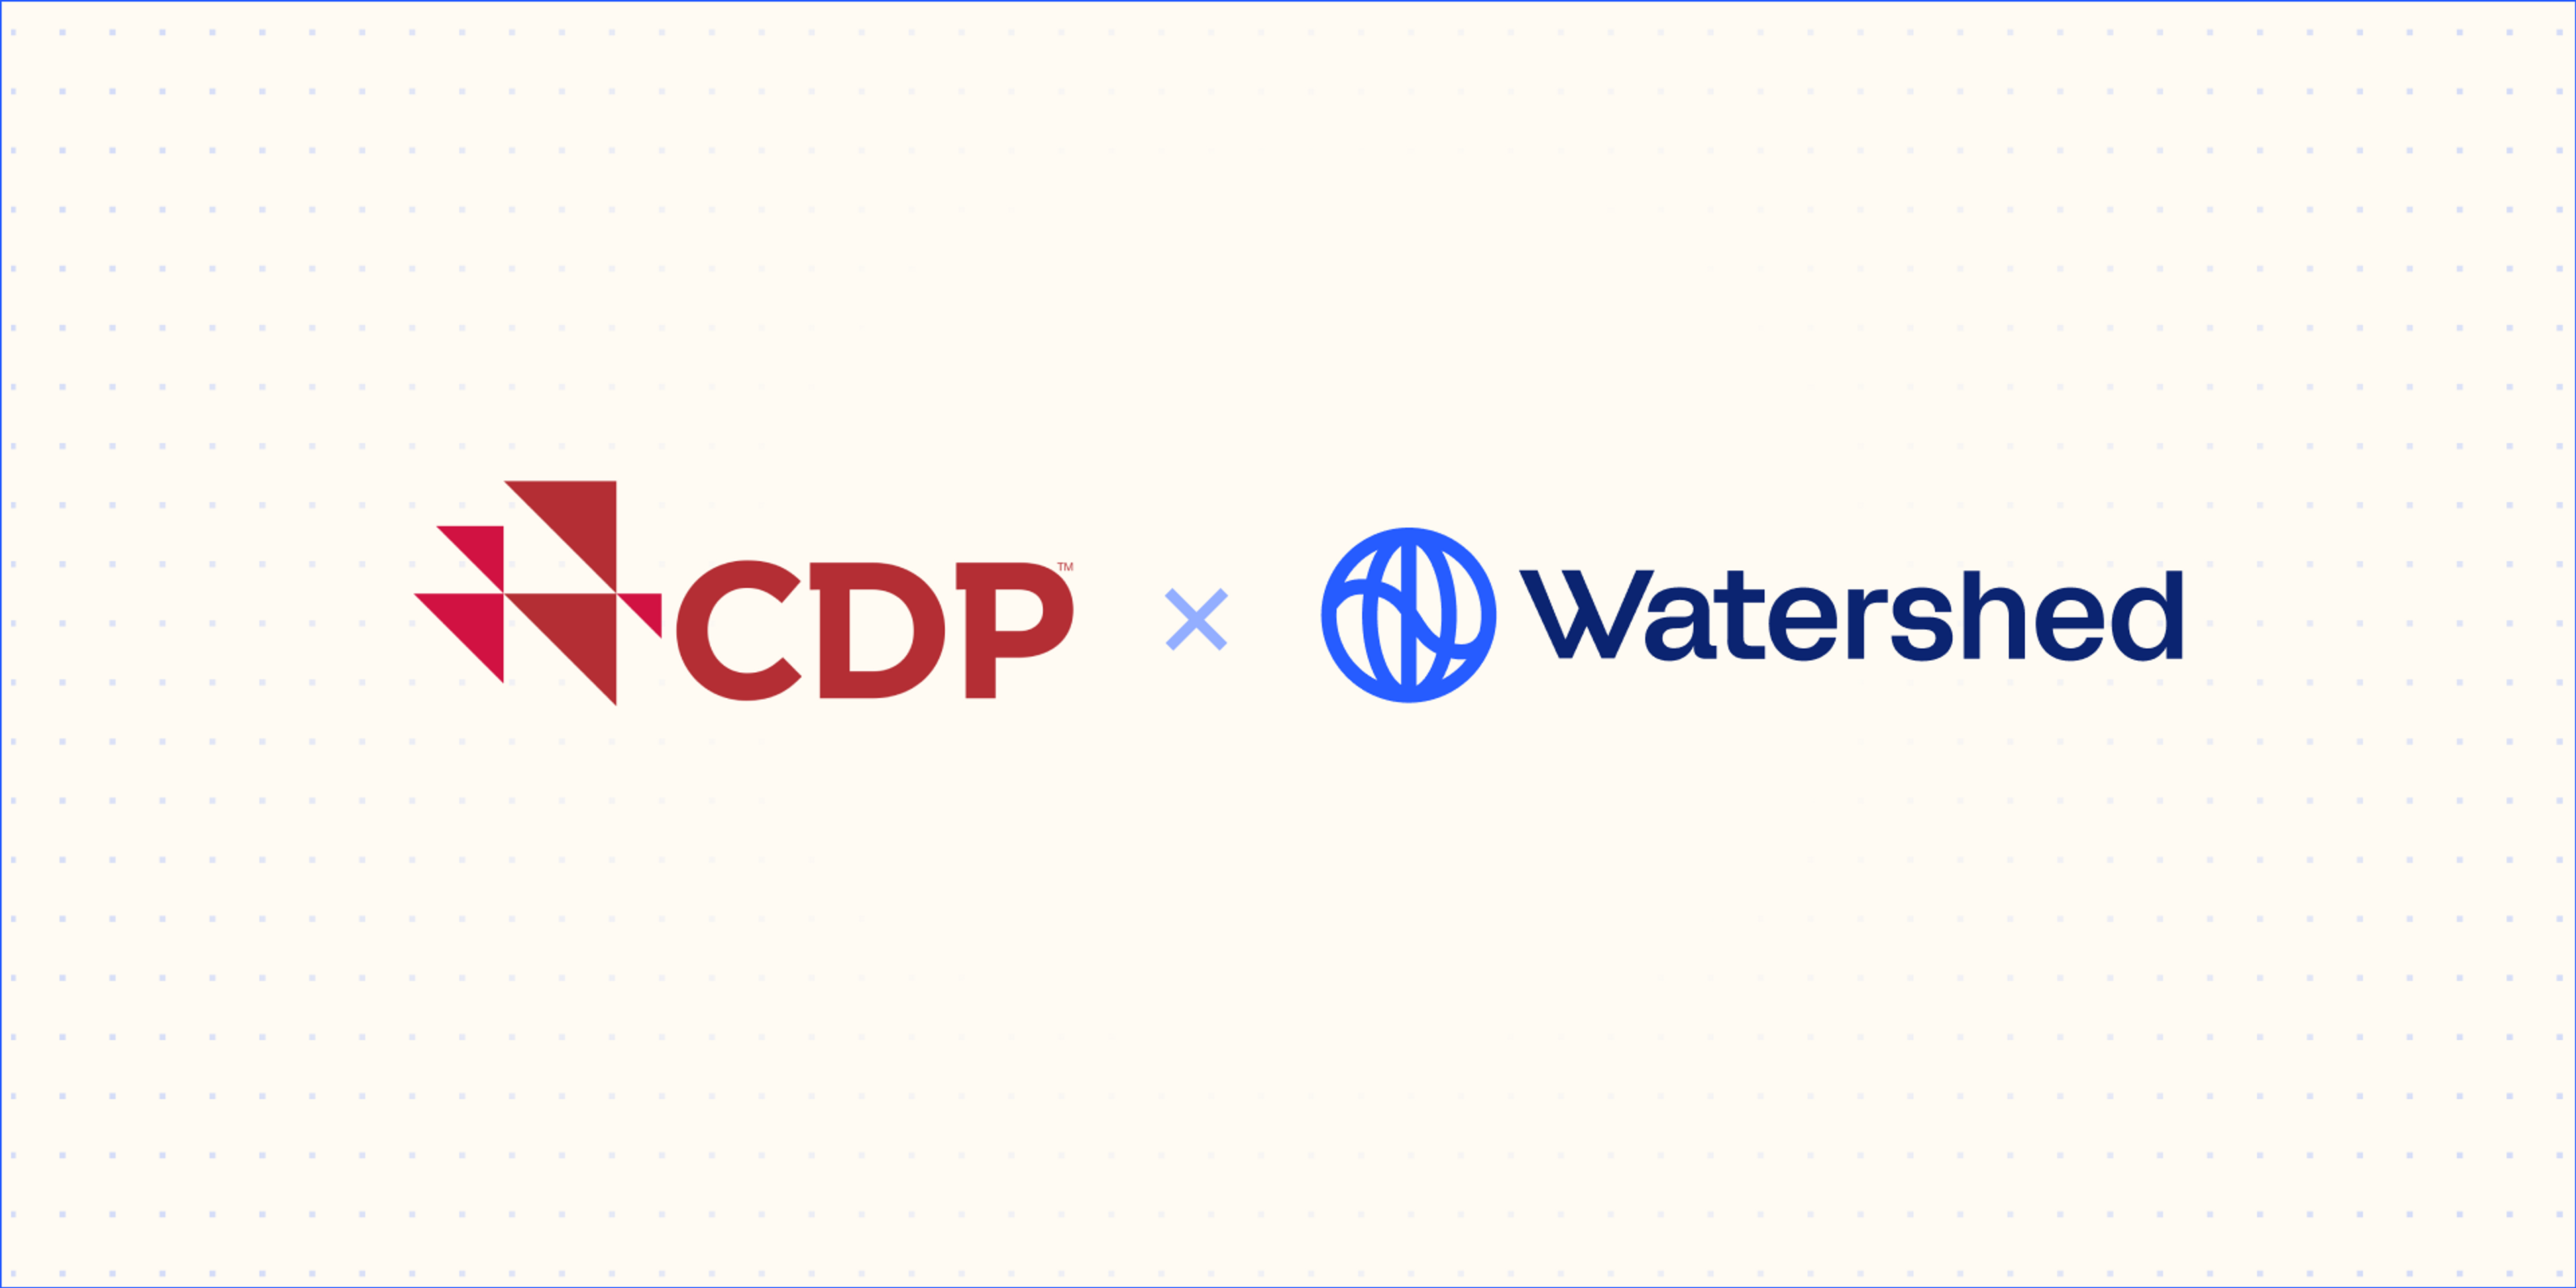 Watershed attains CDP gold accreditation